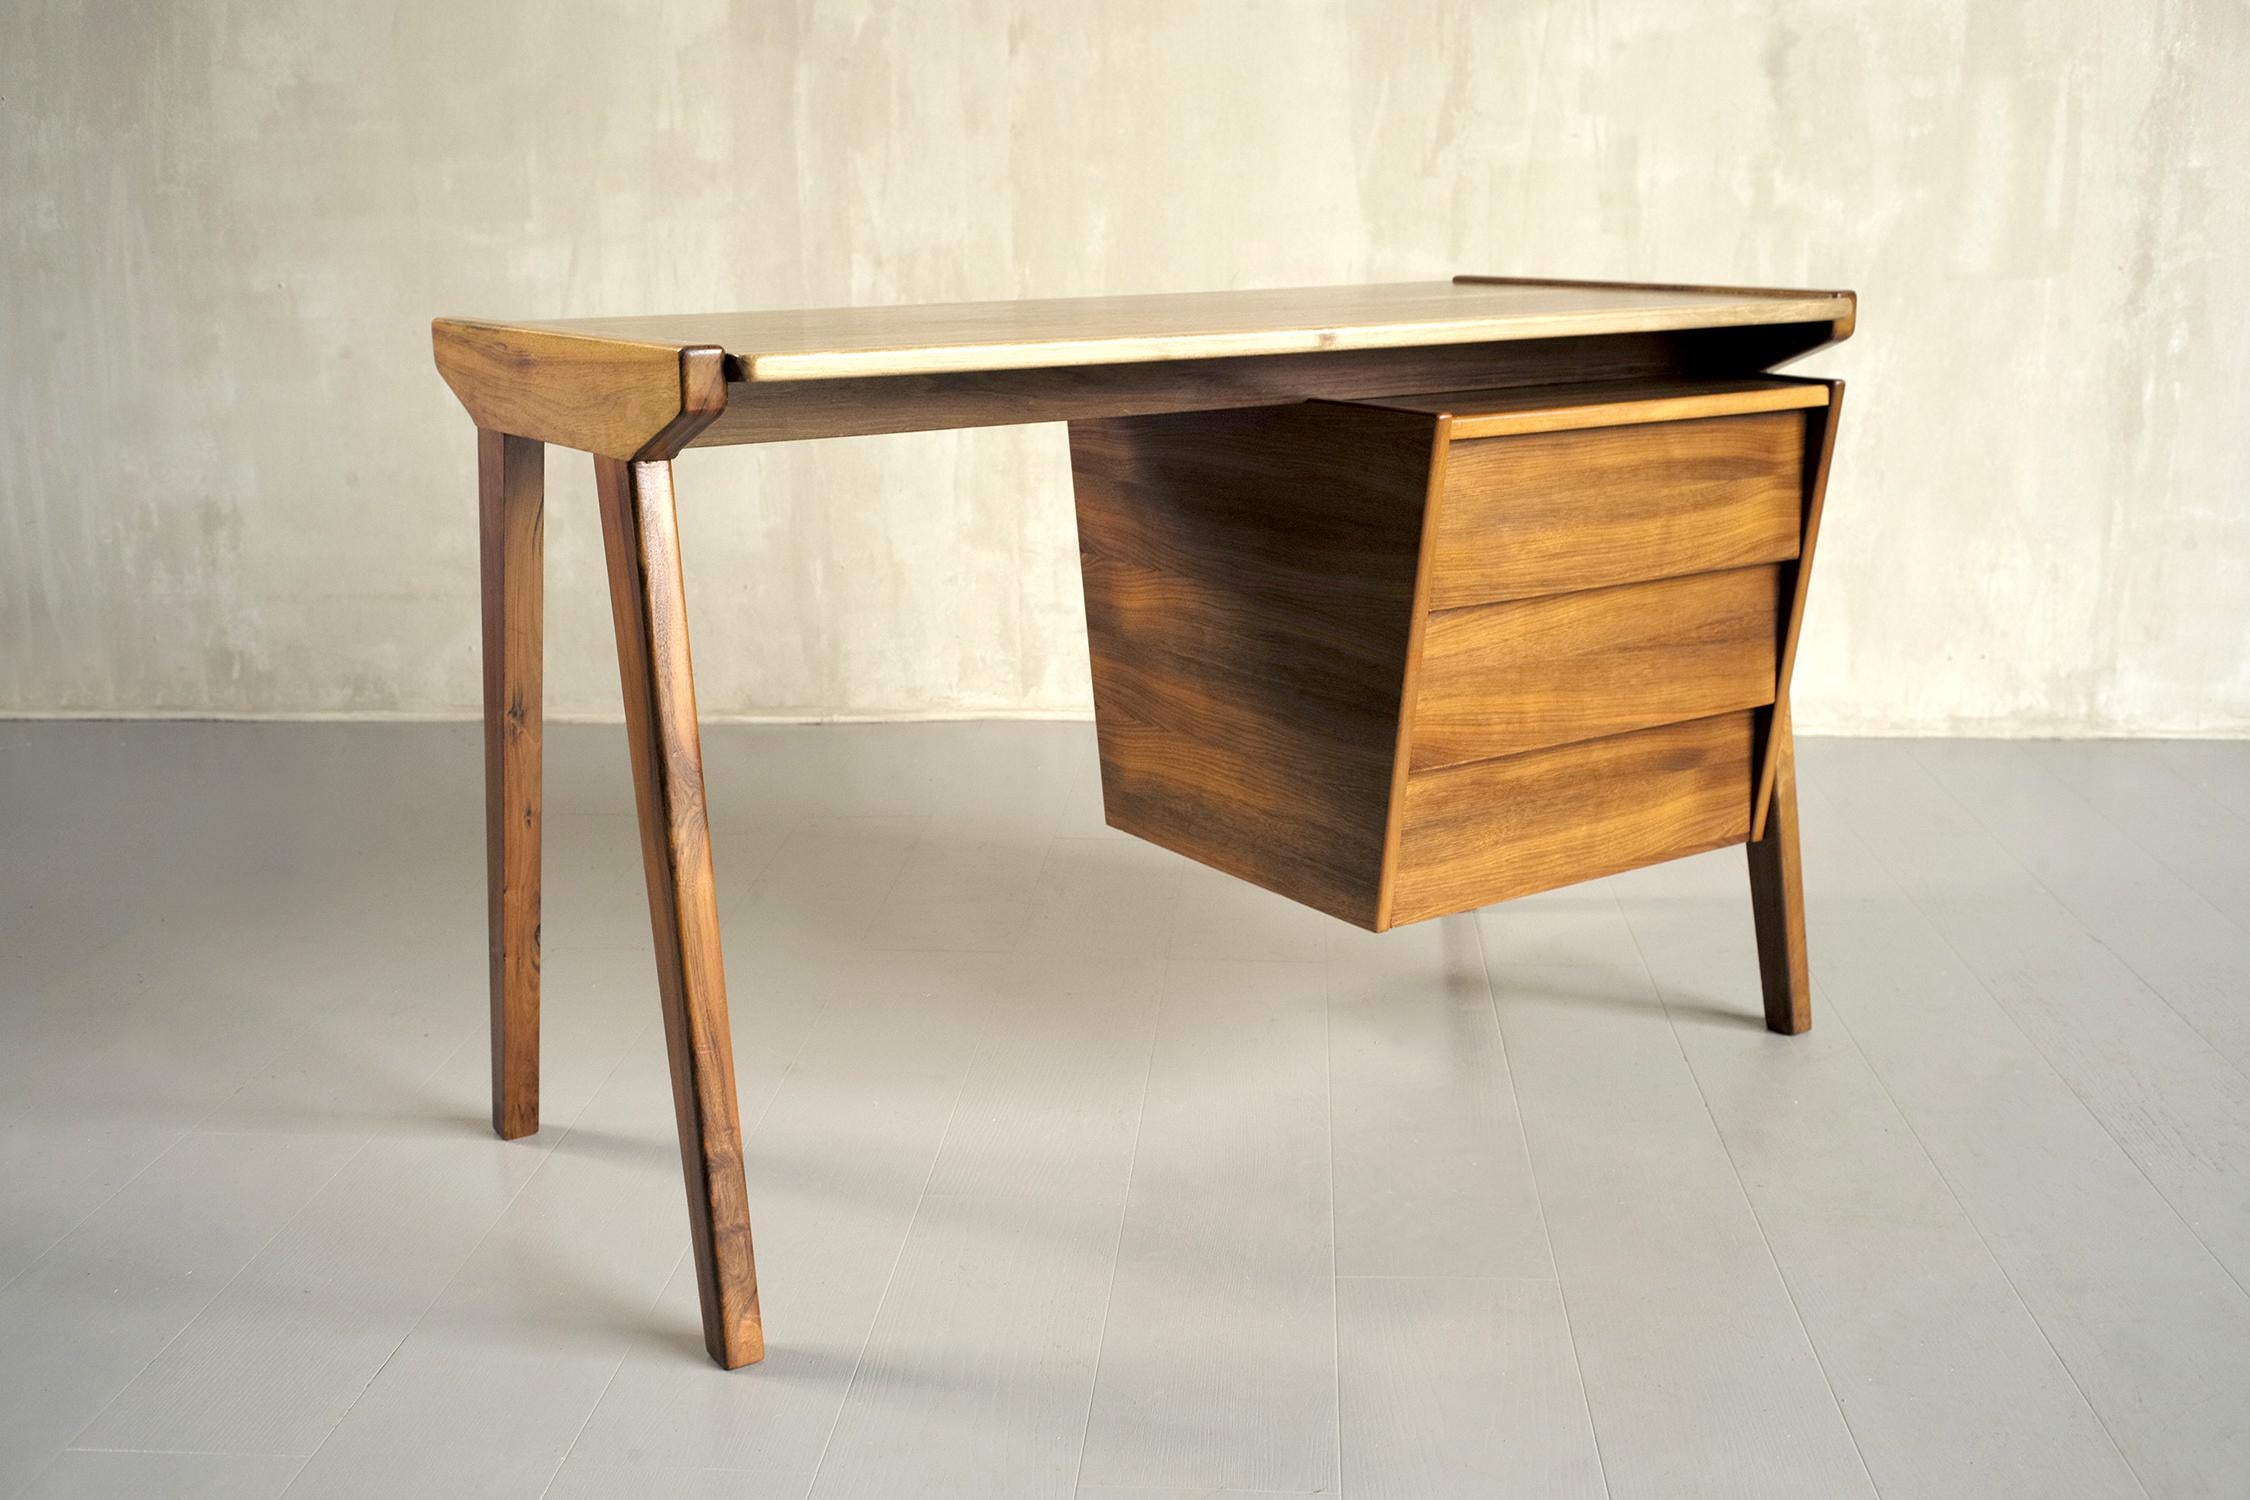 Box desk in blond walnut, 1960. The portico-shaped base receives a pyramidal box with three cutaway drawers. The line and the realization give this desk a special charm and elegance.
Very good condition.